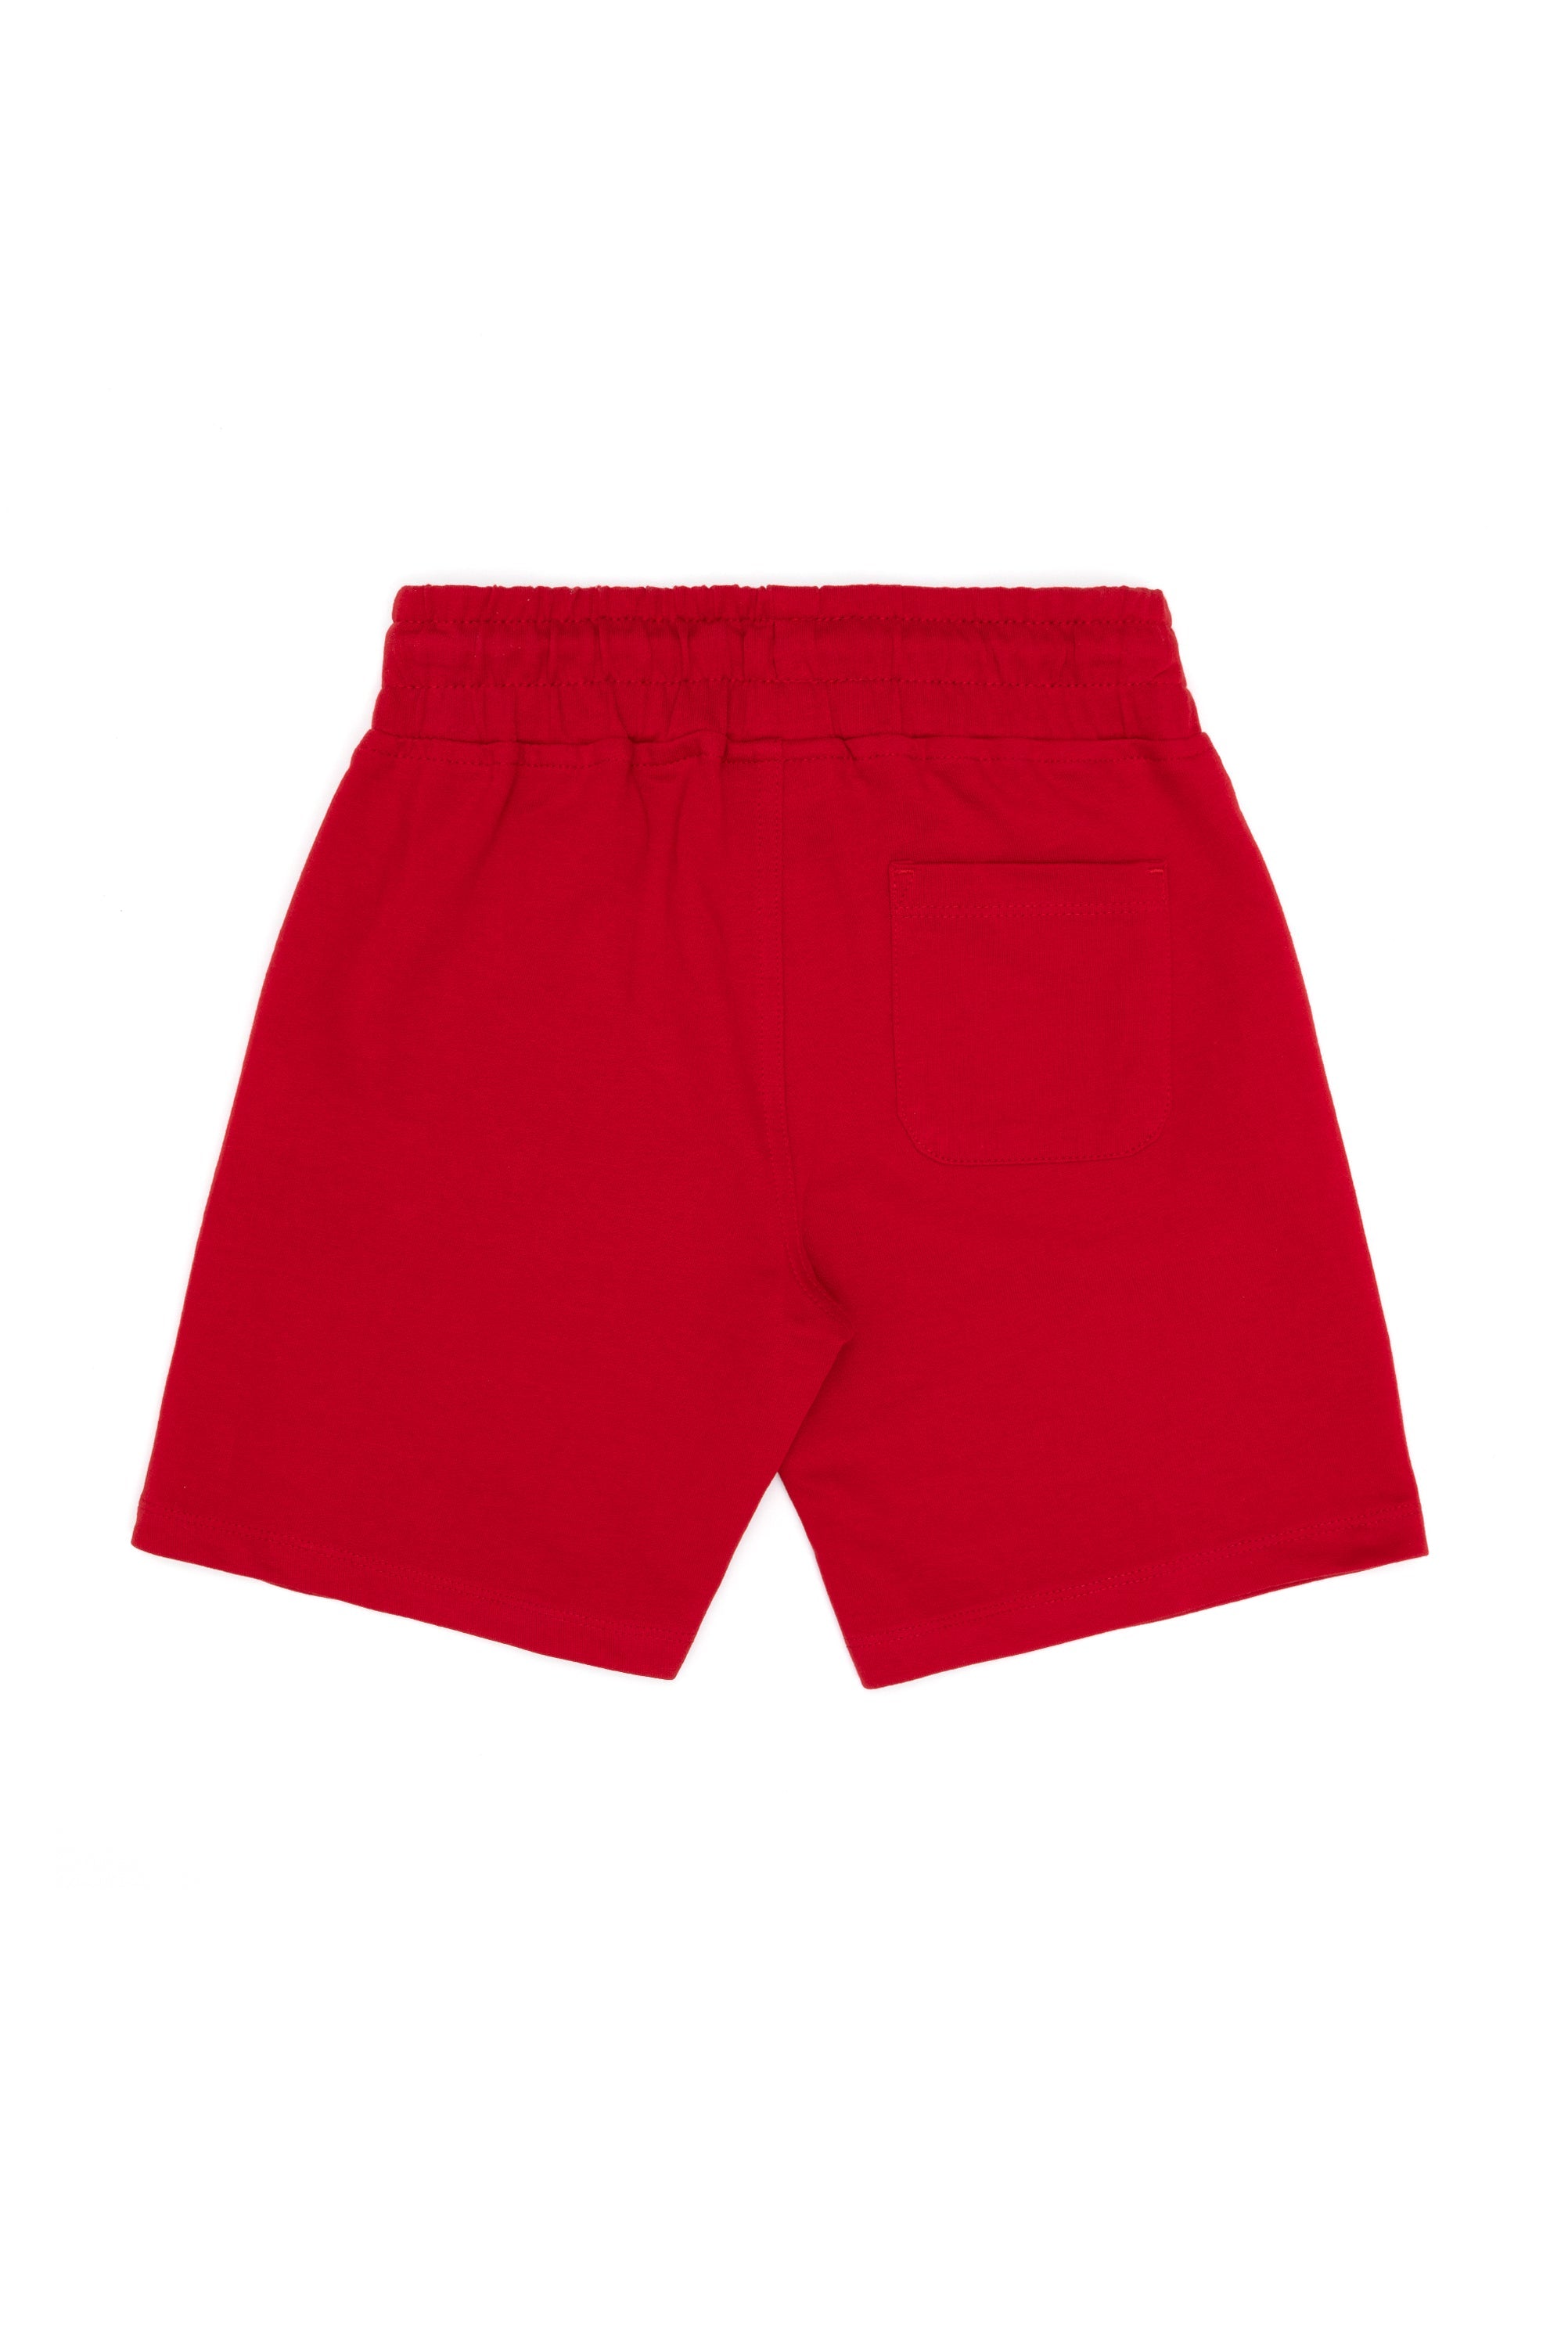 Red Knitted Shorts With Black Drawstrings